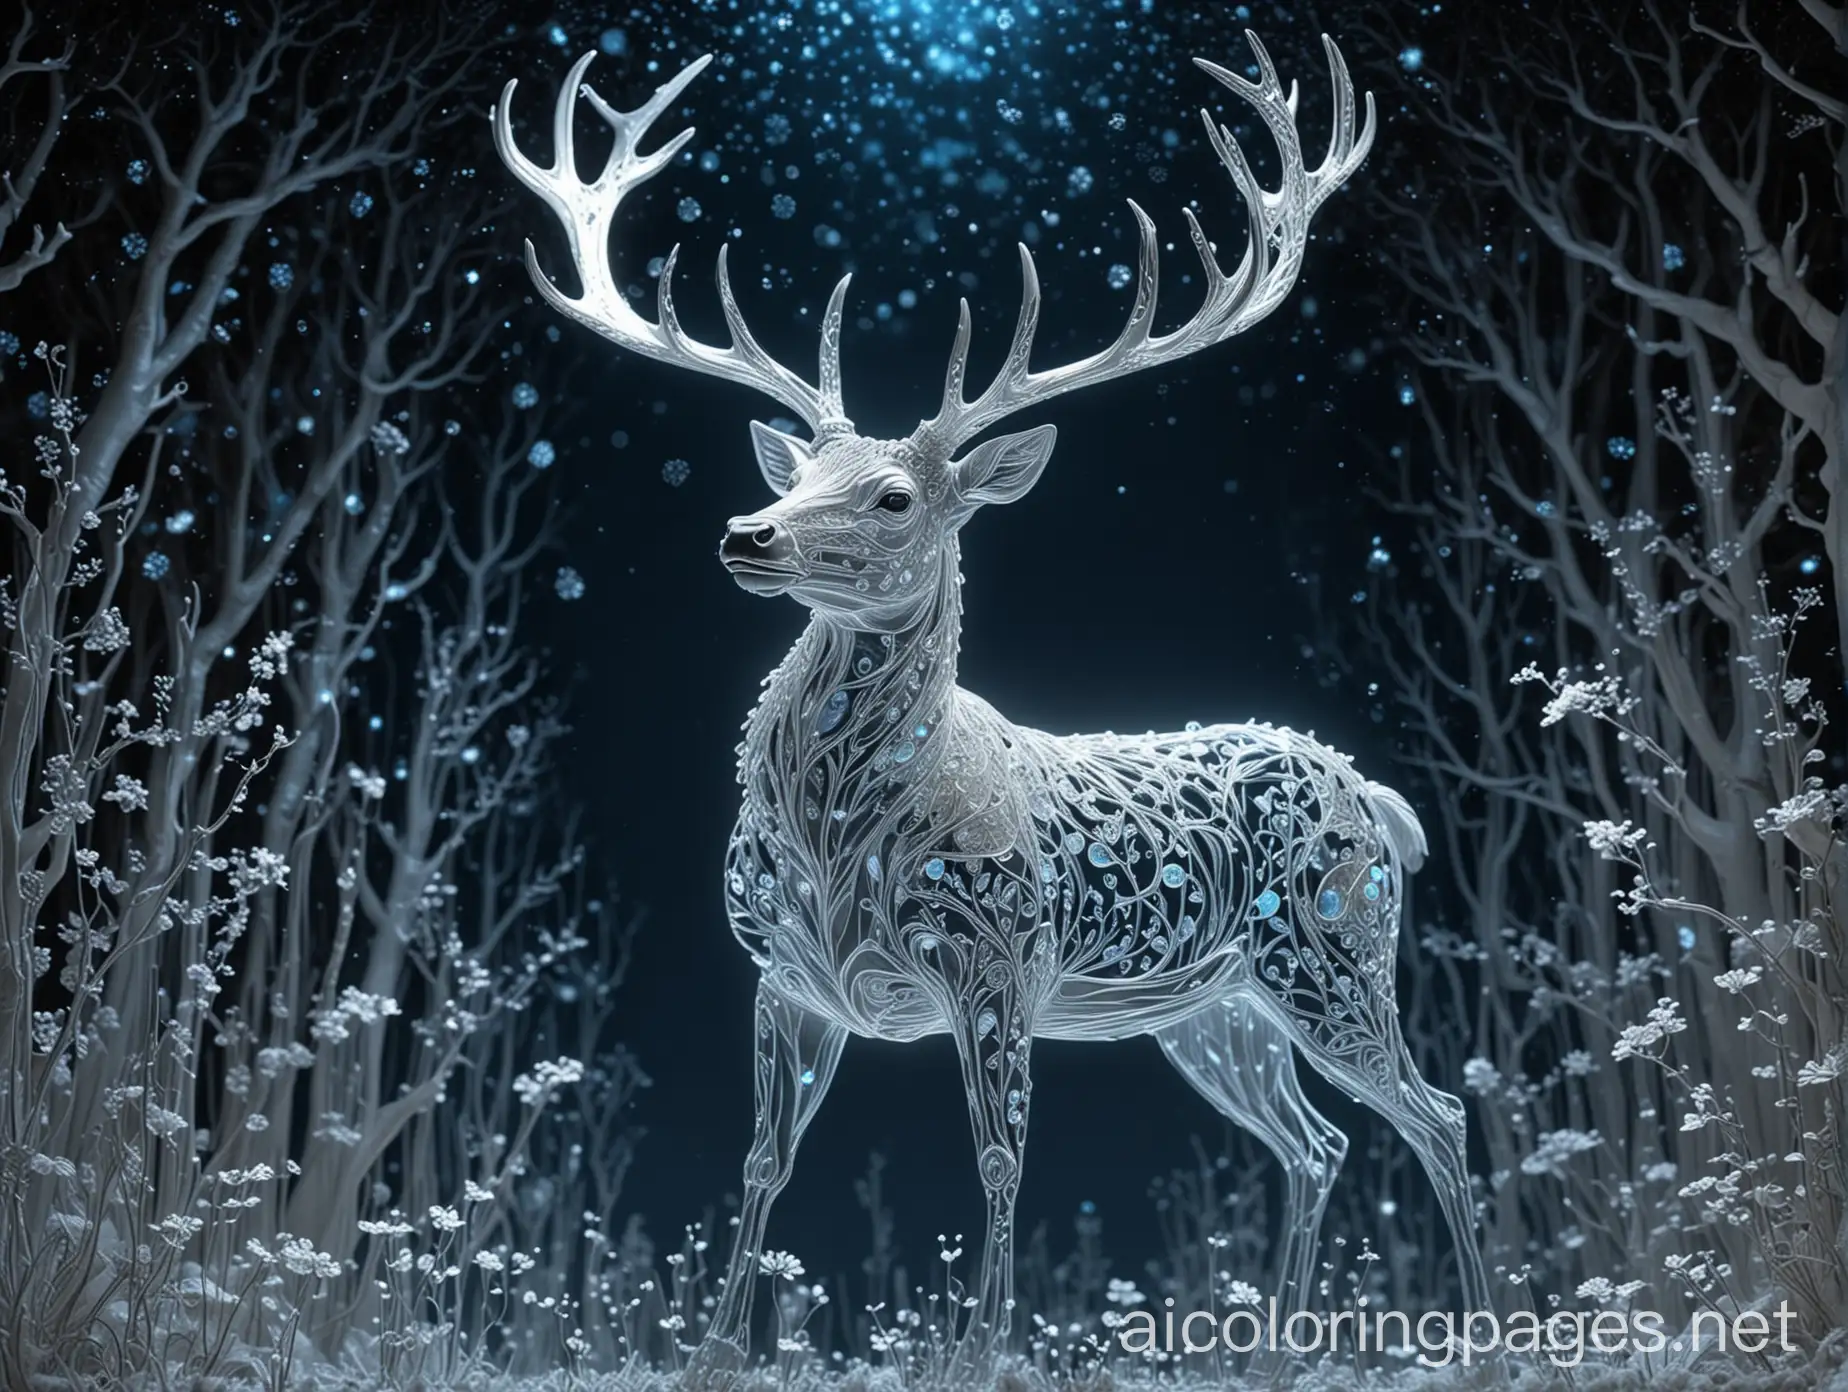 transparent glass deer filled with bioluminescent plants, luminous, opalescent, Insanely detailed beautiful deer with glass antlers : meticulously detailed filigree deer: extreme contrast and saturation : starry galactic night sky background : magical fantasy artwork : ultra high quality : dramatic lighting : extreme contrast : rule of thirds : HDR : photorealistic : florescent light, Coloring Page, black and white, line art, white background, Simplicity, Ample White Space. The background of the coloring page is plain white to make it easy for young children to color within the lines. The outlines of all the subjects are easy to distinguish, making it simple for kids to color without too much difficulty